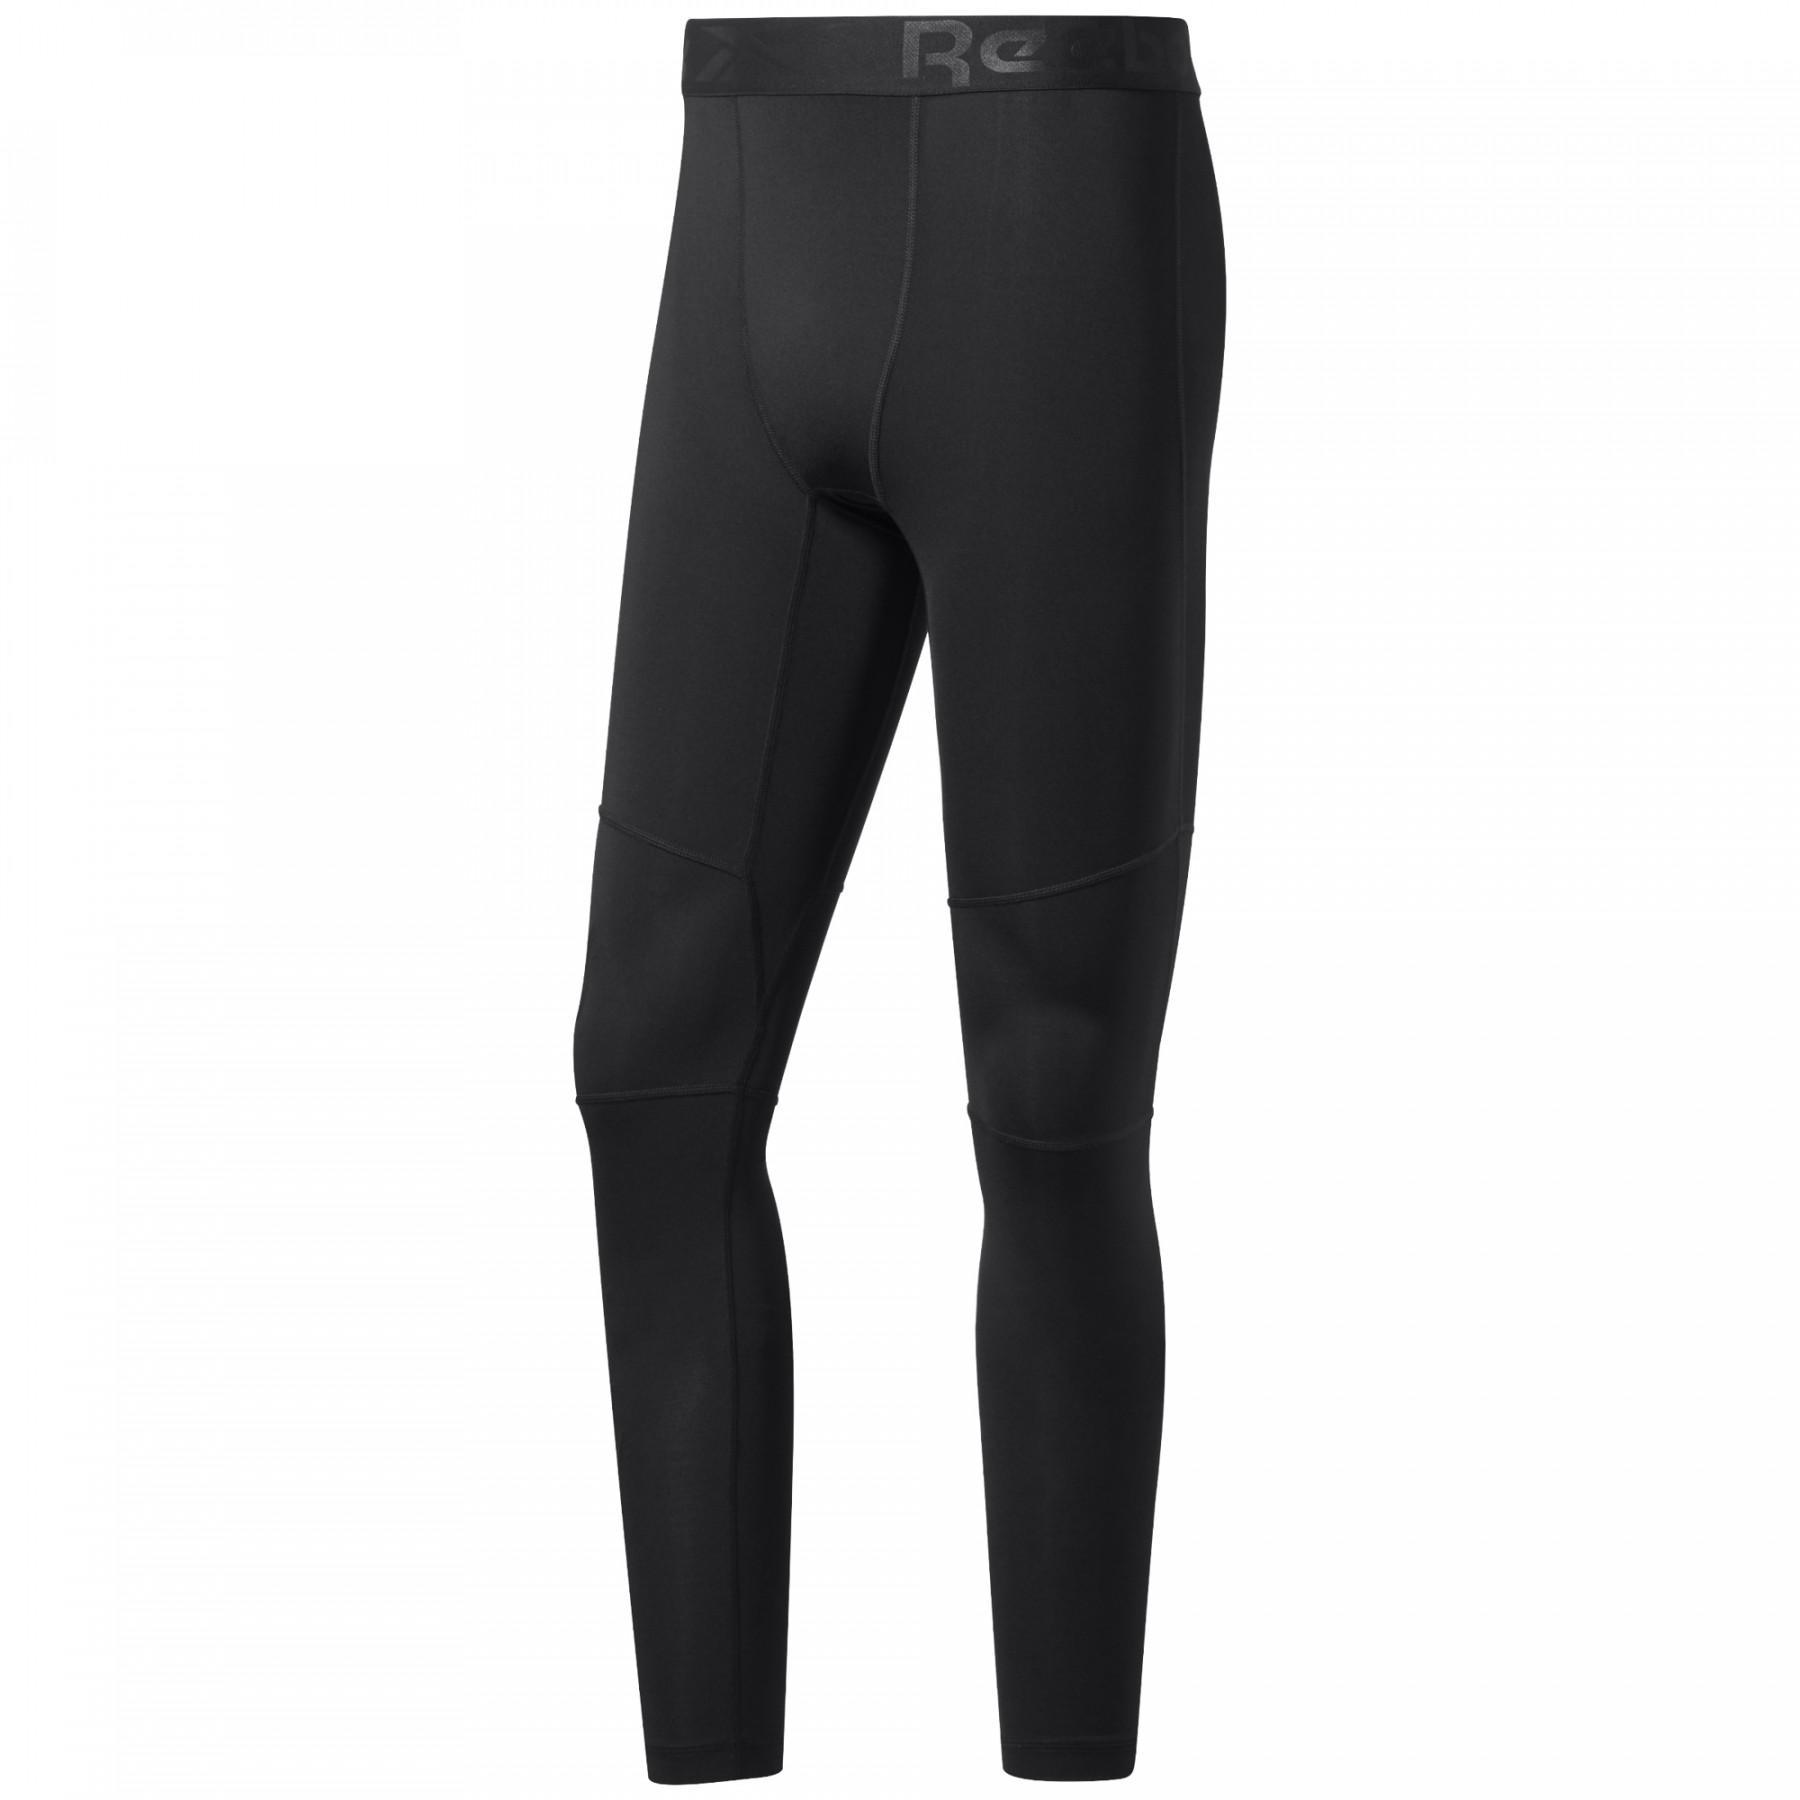 Compression tights Reebok Workout Ready - Men's Clothing - Fitness